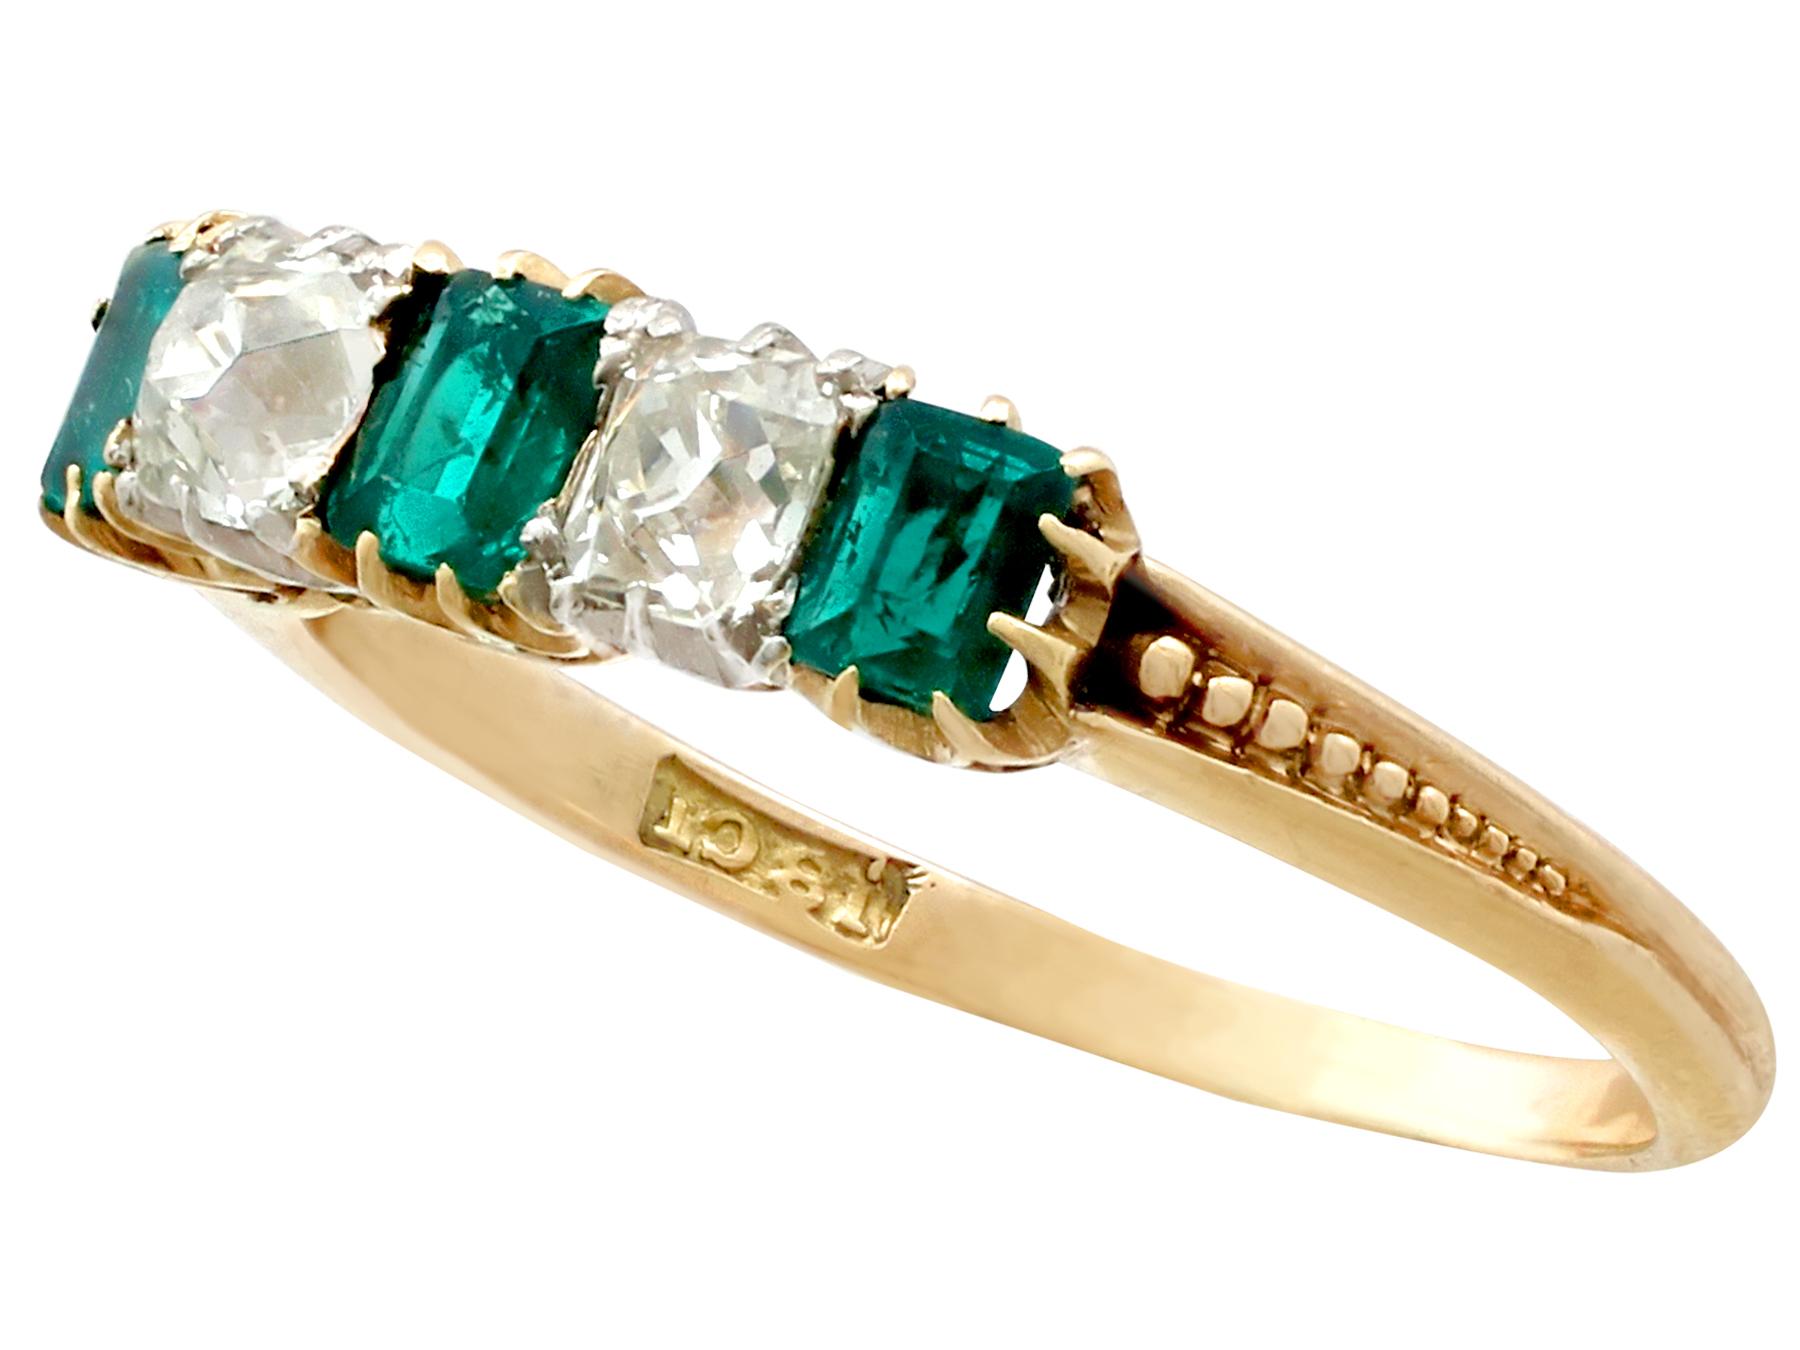 Women's 1910s Antique Emerald and Diamond Five Stone Cocktail Ring